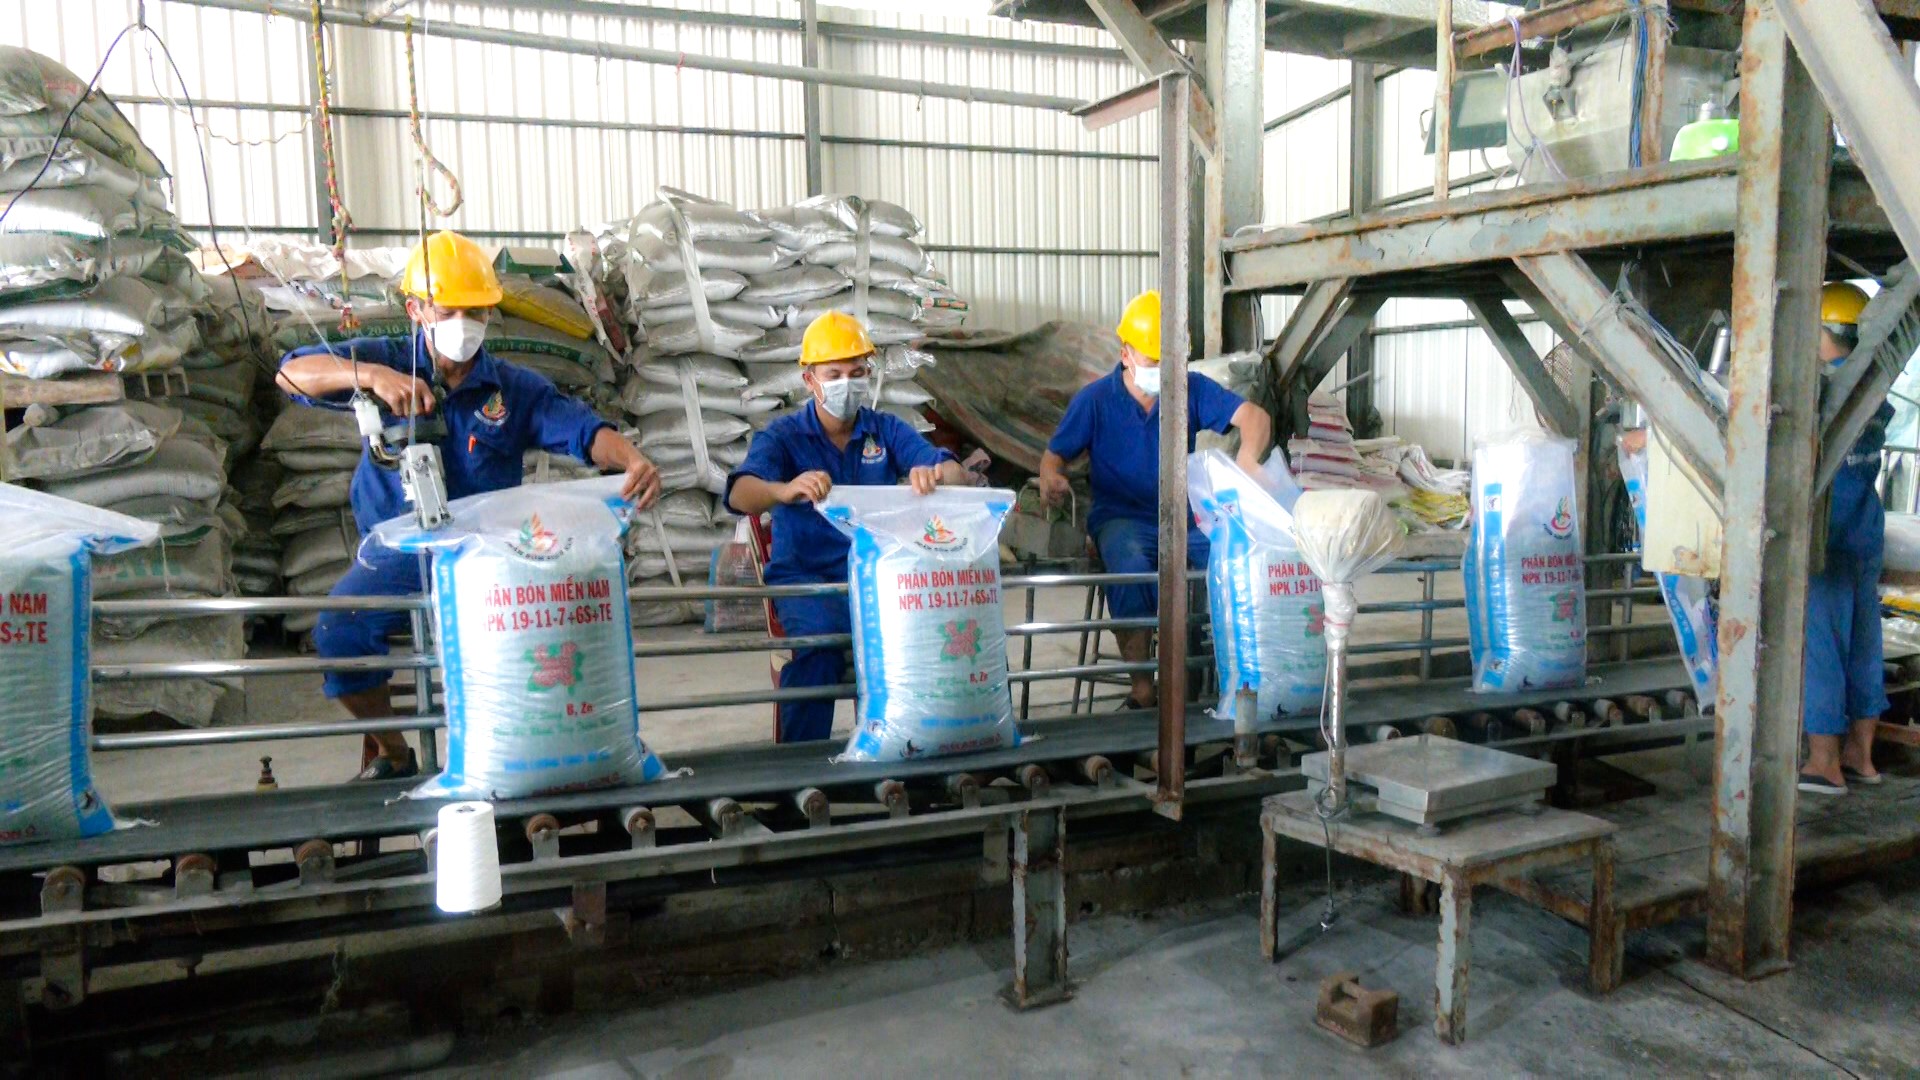 The fertilizer output decreased greatly, so enterprises are pressured to increase product prices and farmers were directly affected. Photo: Kim Anh.